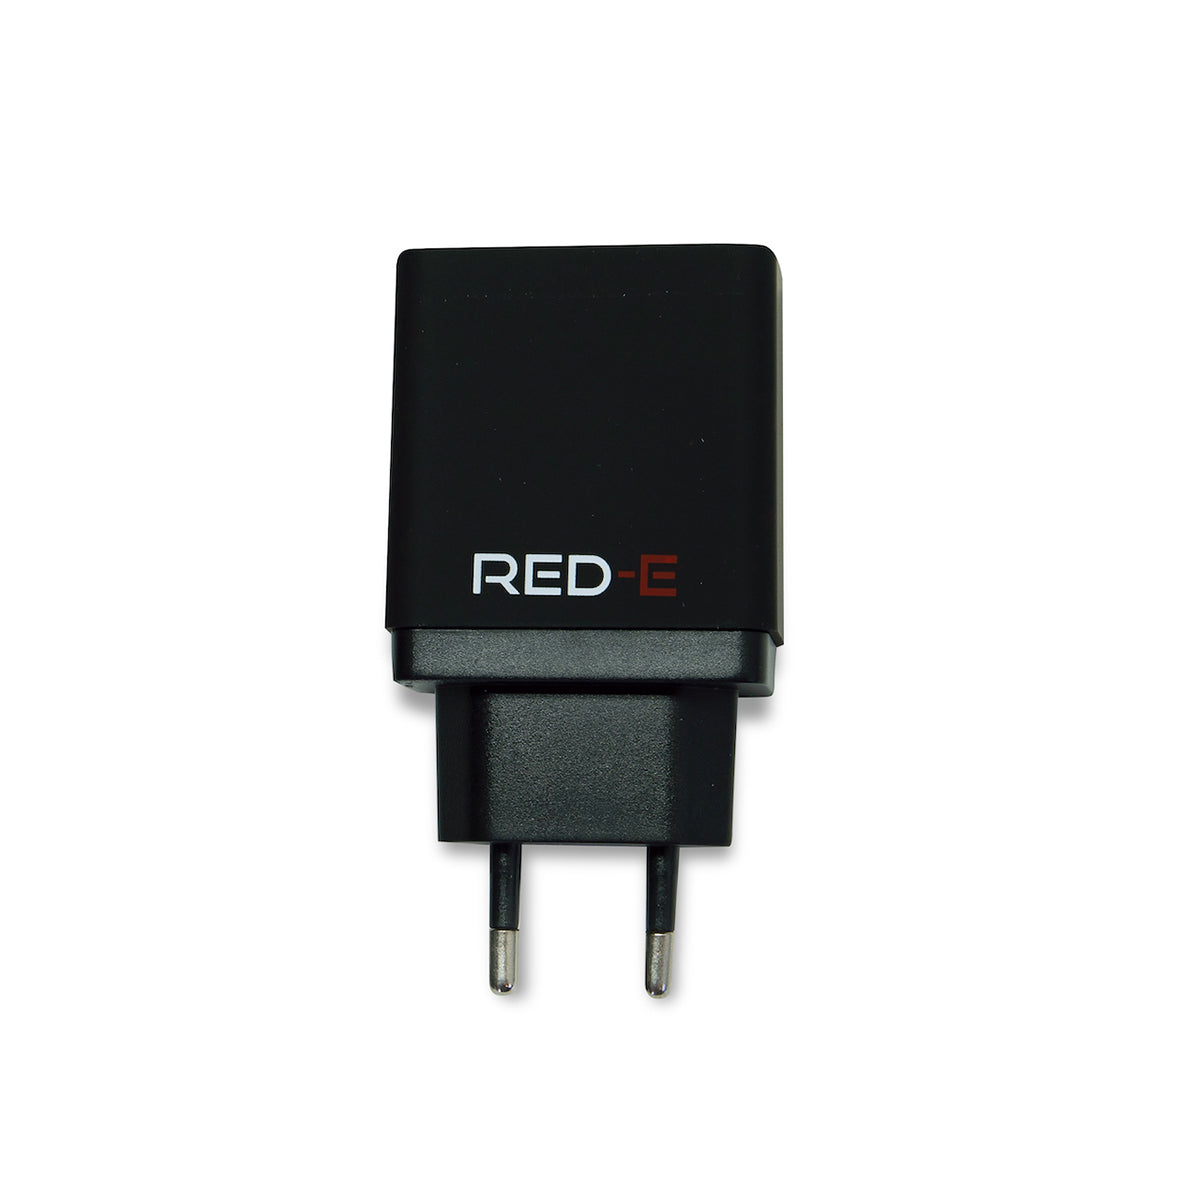 RED-E Wall Charger - Black Camera tek